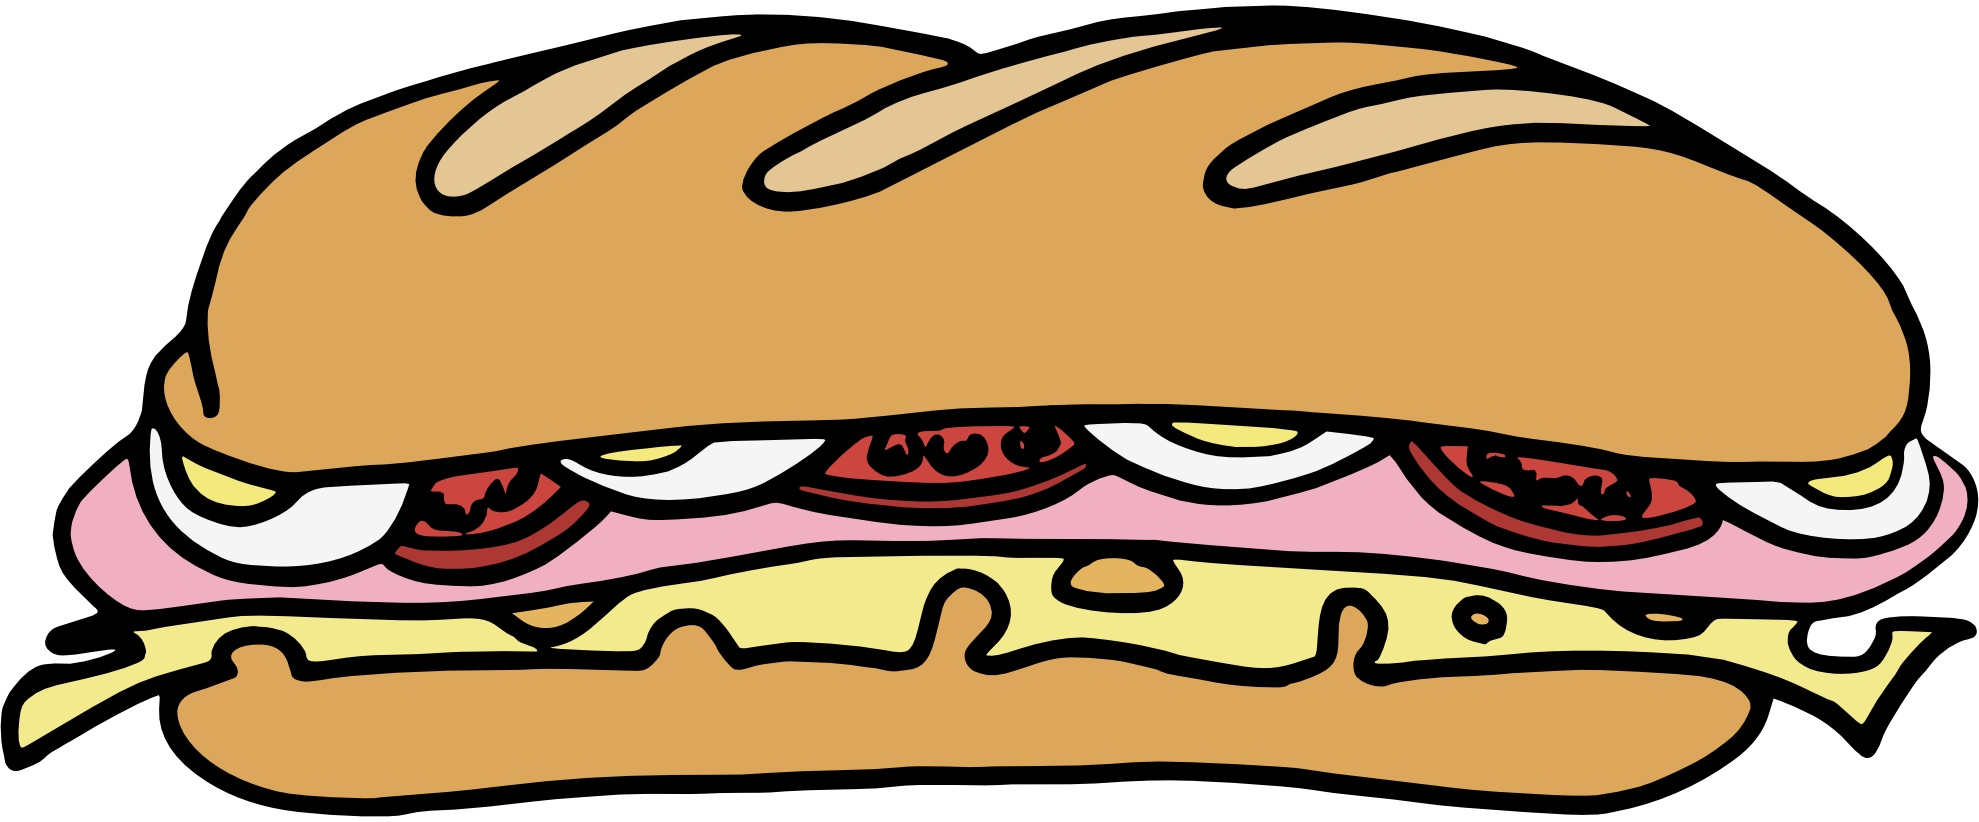 Images For  Cheese Sandwich Clipart